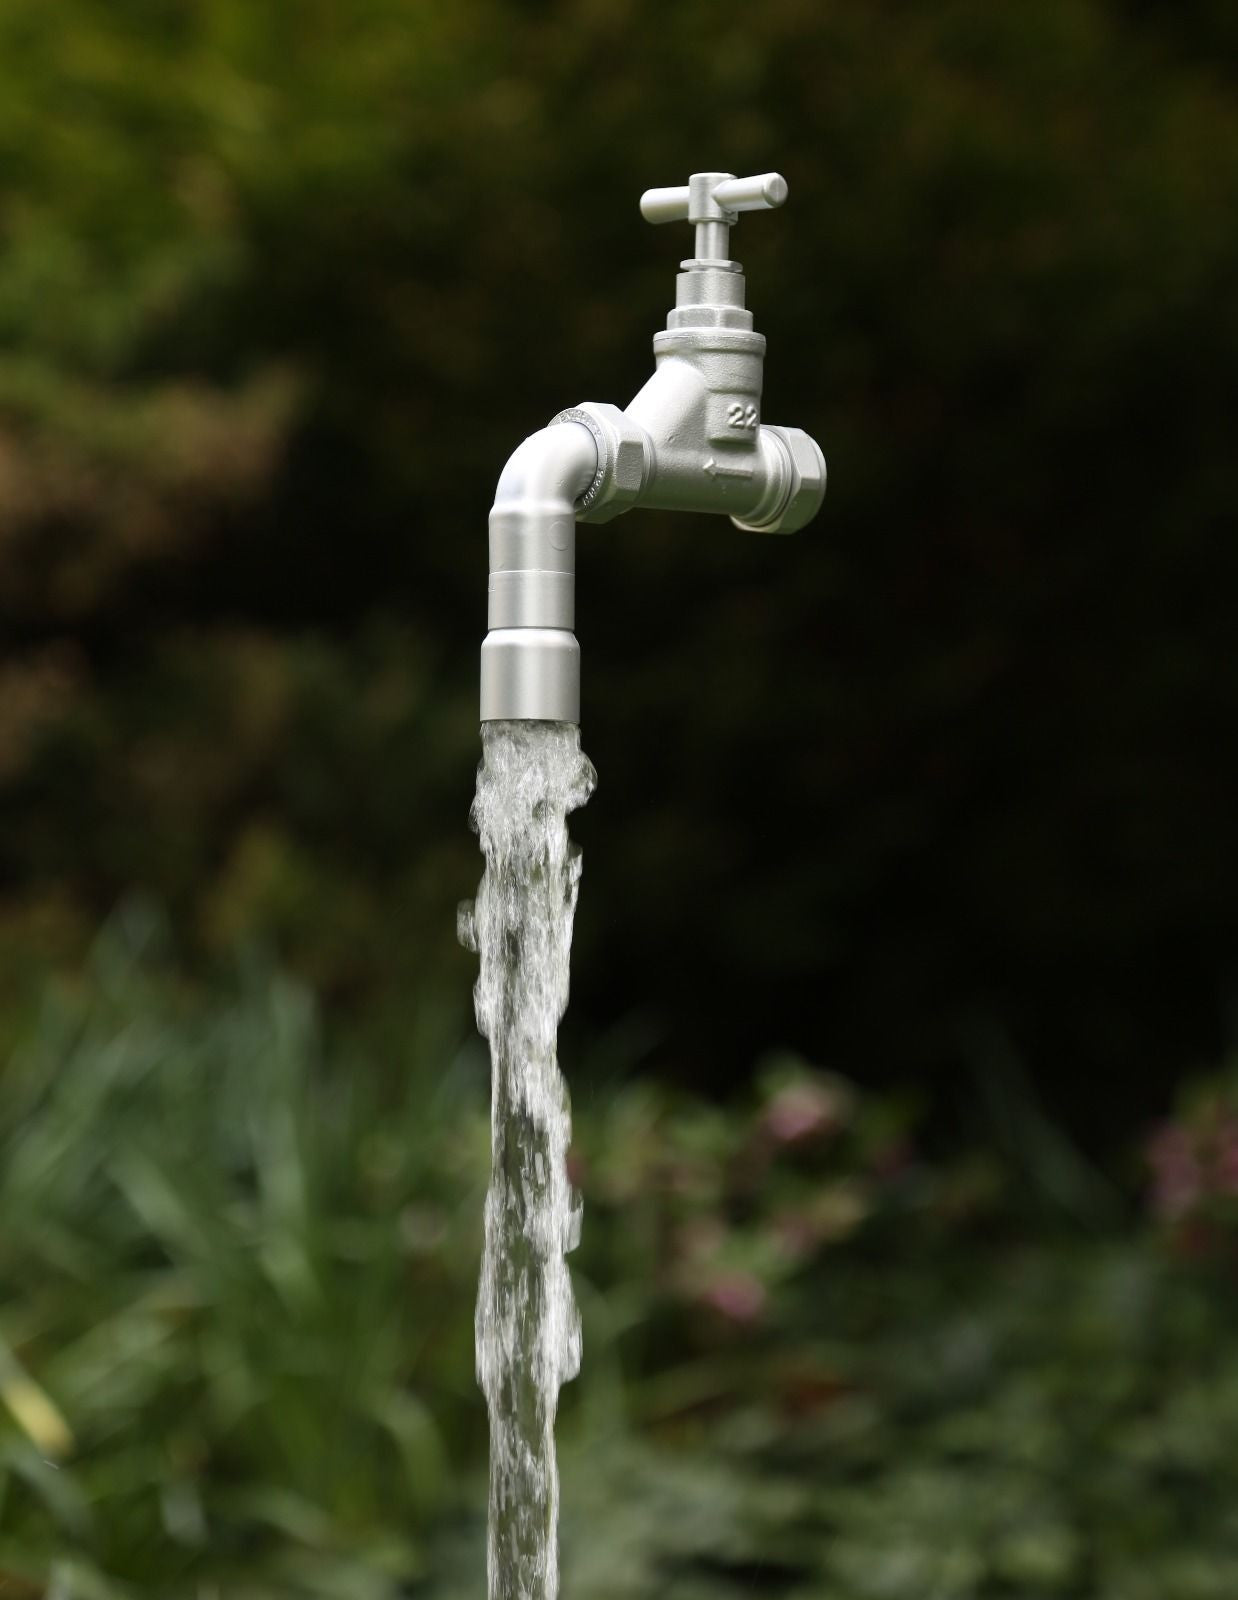 22mm Sunken Floating Tap Water Feature - FREE UK DELIVERY